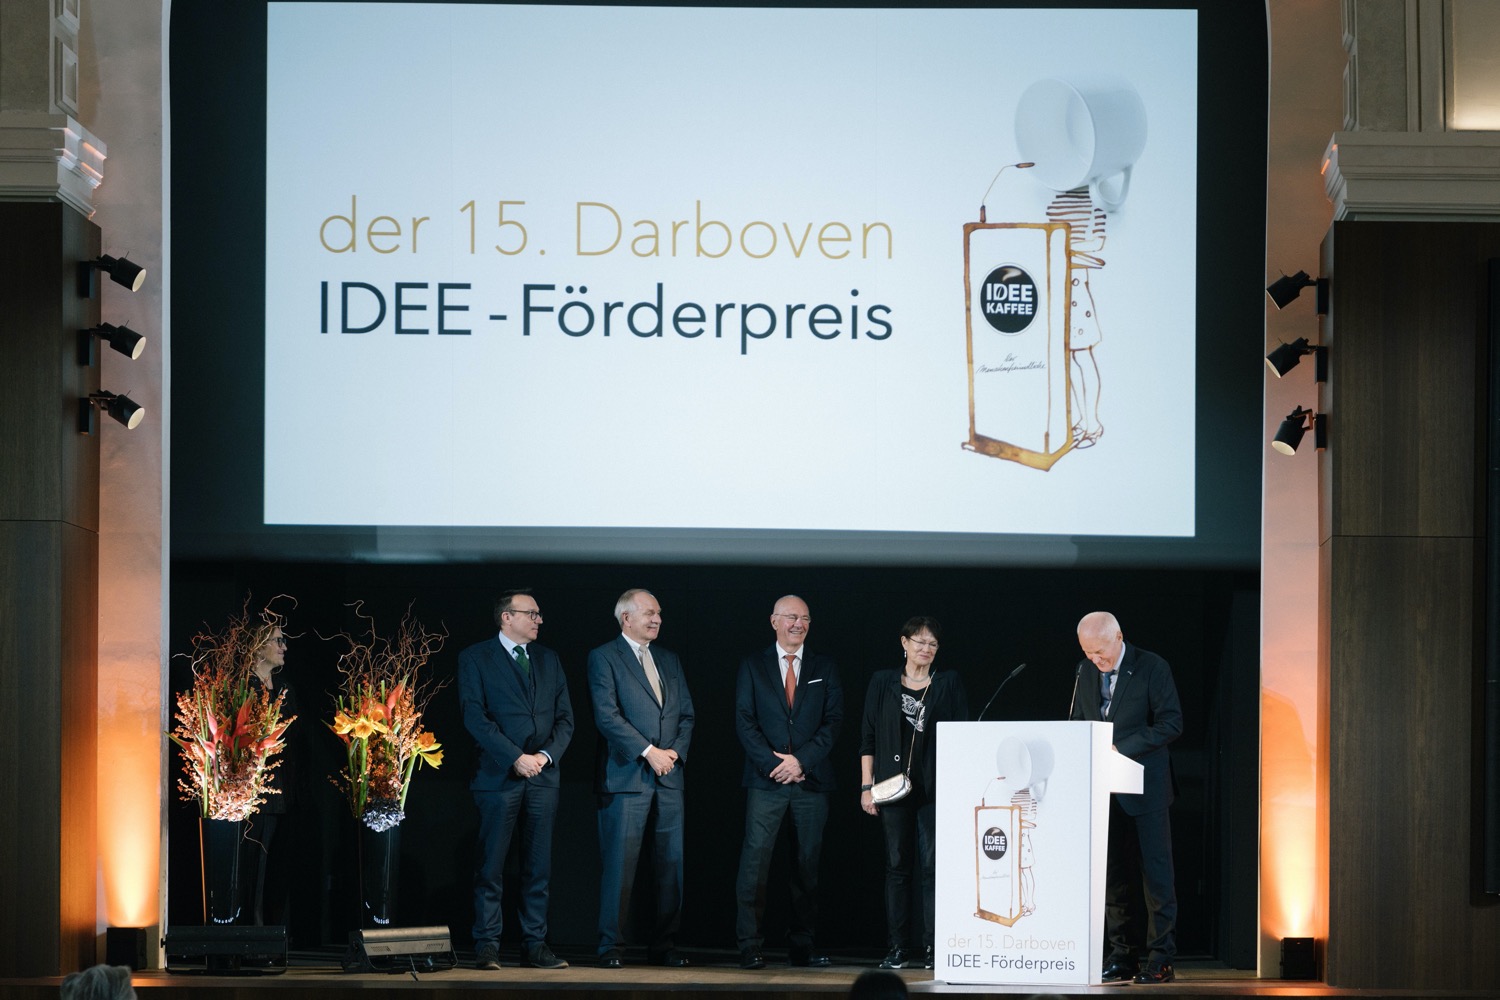 Award ceremony for the 15th Darboven IDEE Sponsorship Award - Jury members on stage